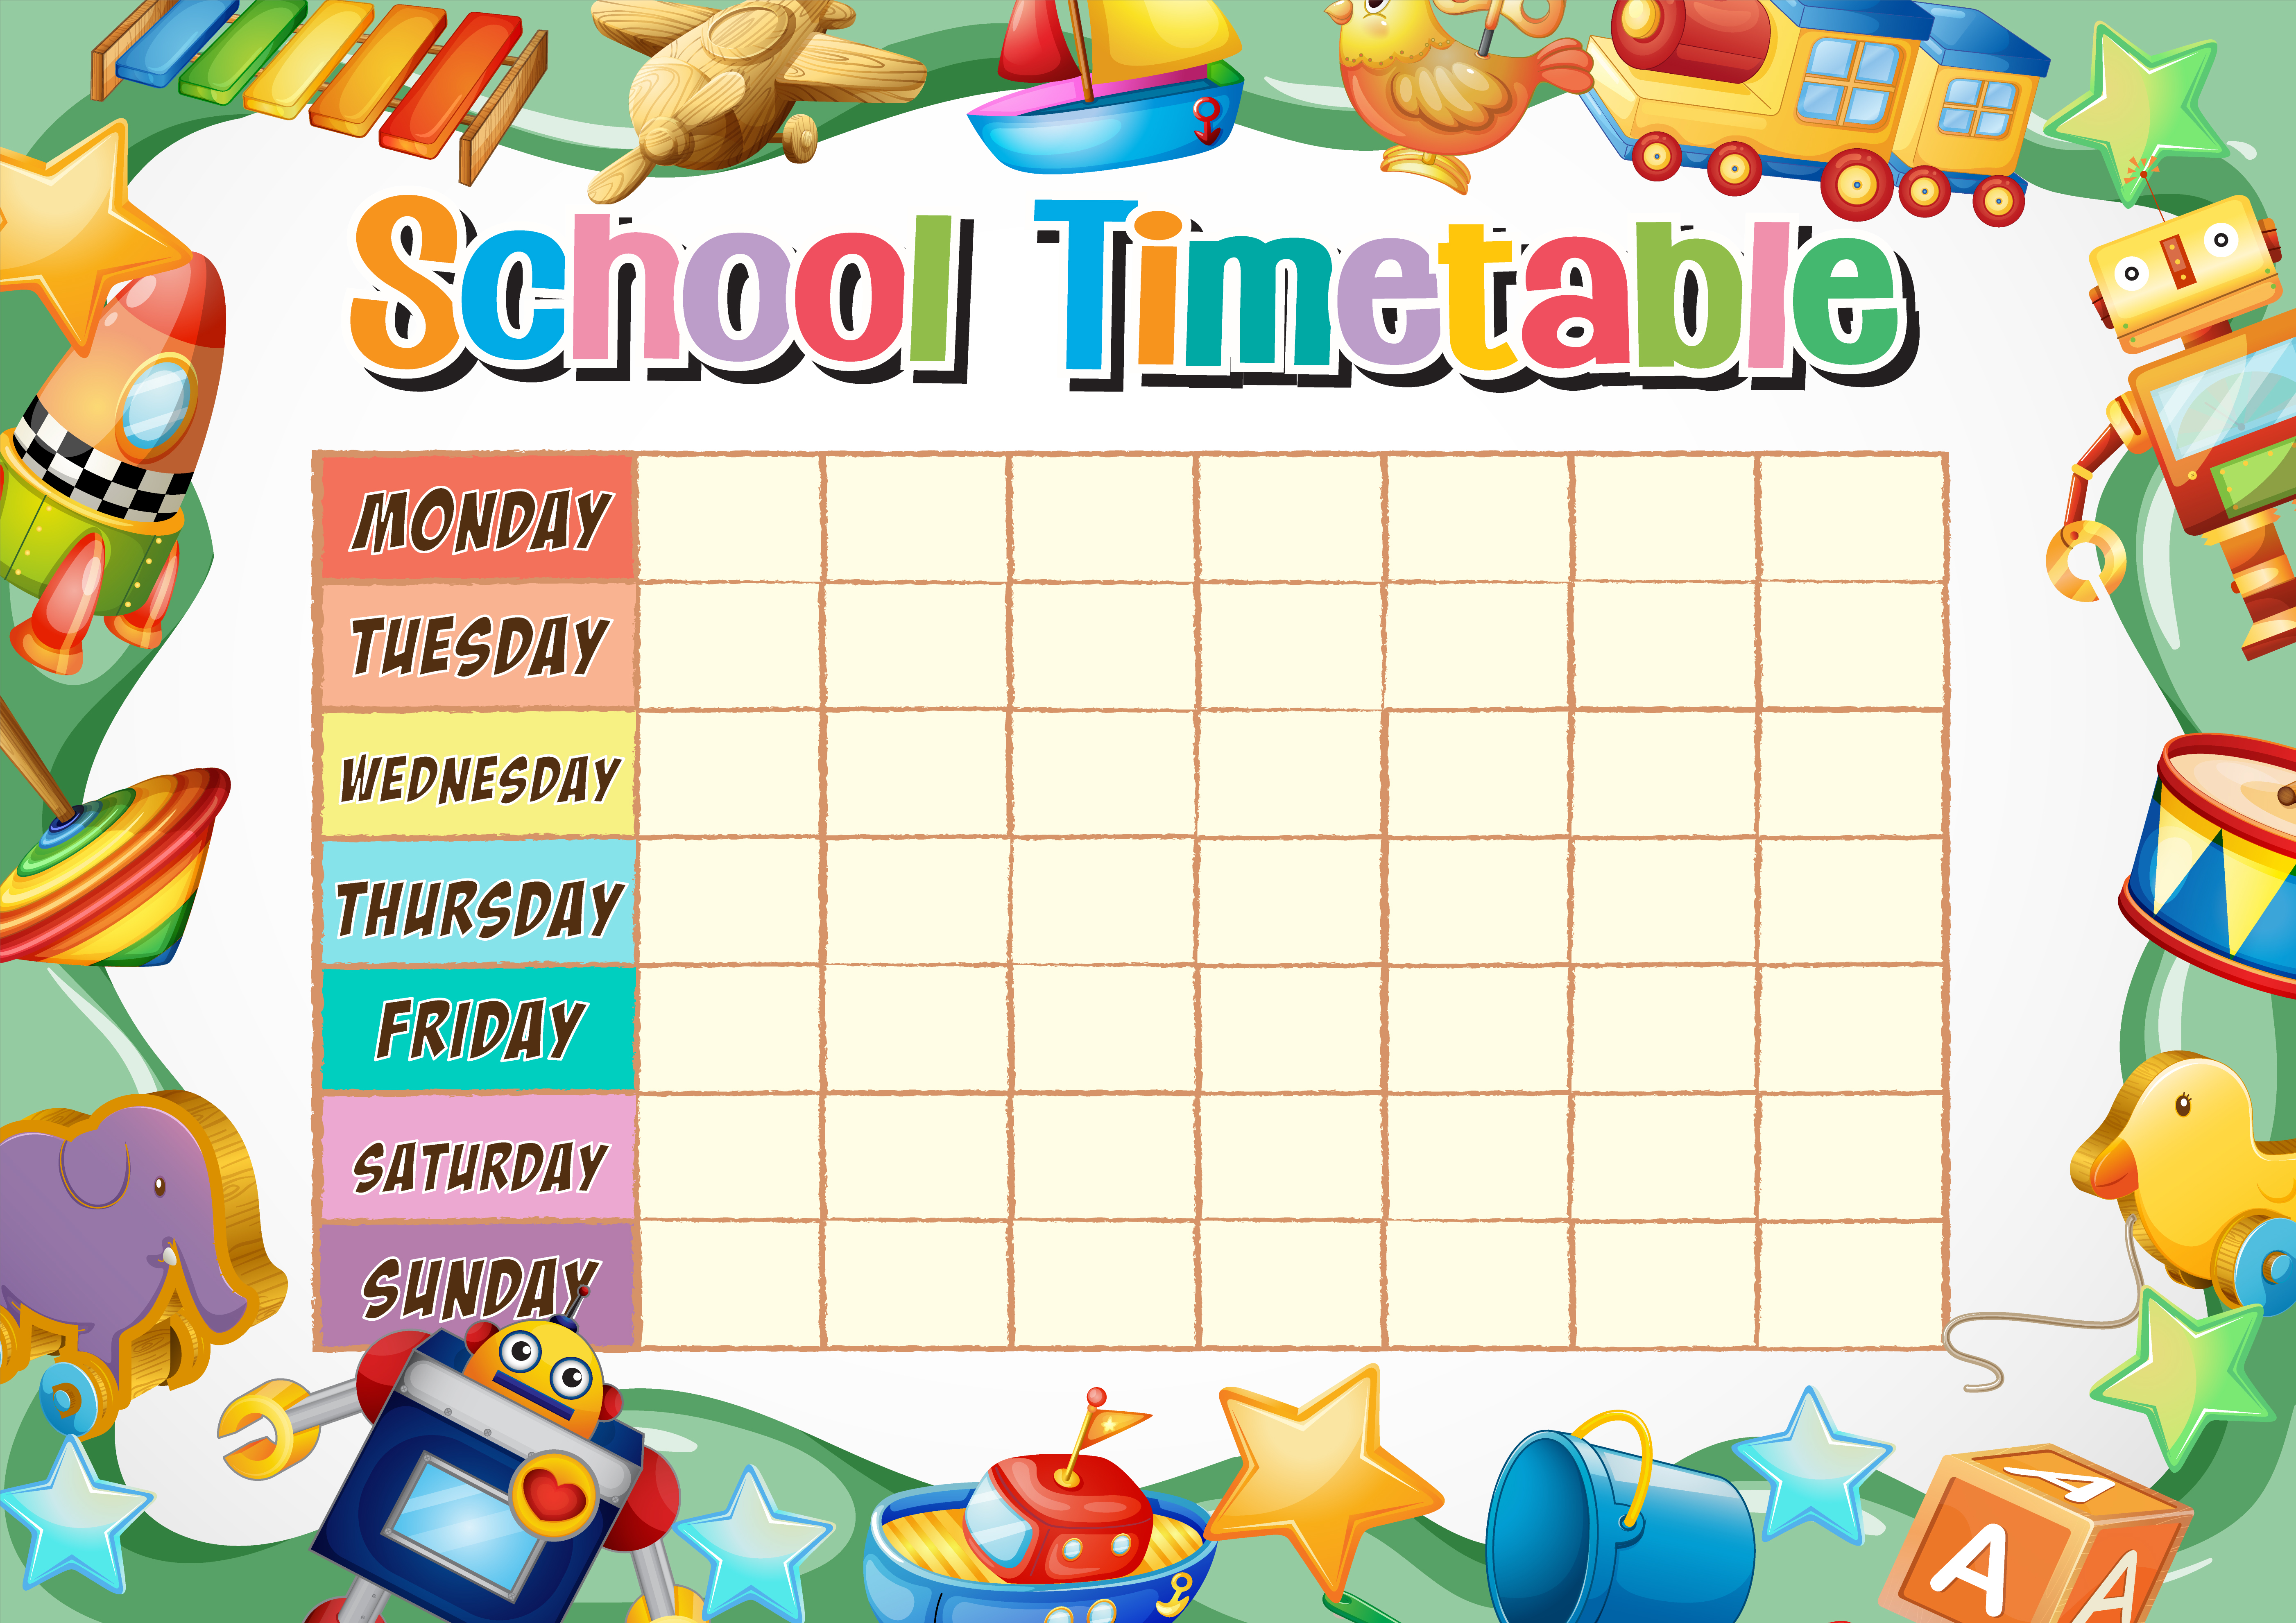 School Timetable Template With Bees Download Free Vectors Clipart B8C